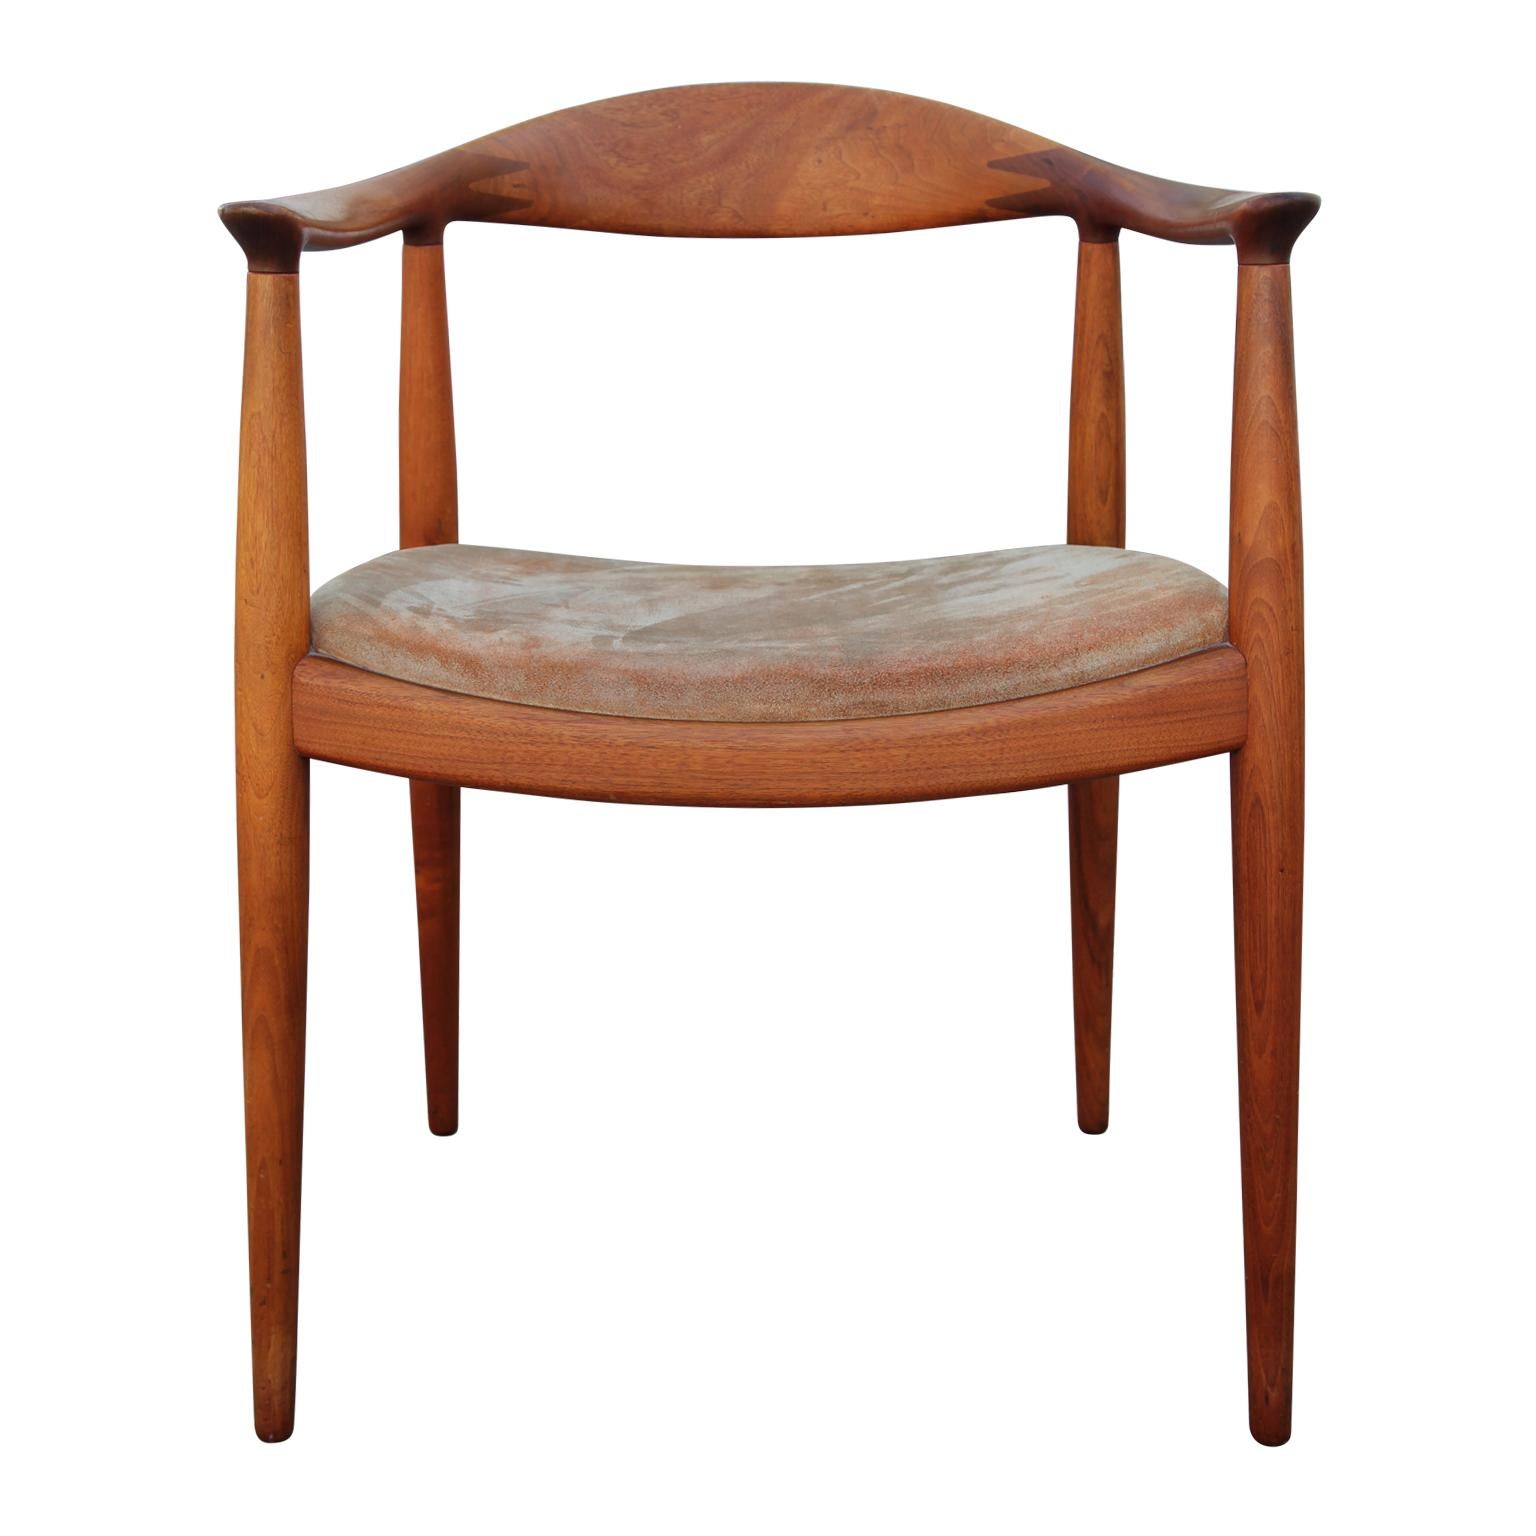 Single Mid-Century Modern dining chair by Hans Wegner for Johannes Hansen made in Denmark. The chair features a brown suede seat and a sculptural modern design. On the bottom of the chair is the makers stamp along with location of production. Teak.